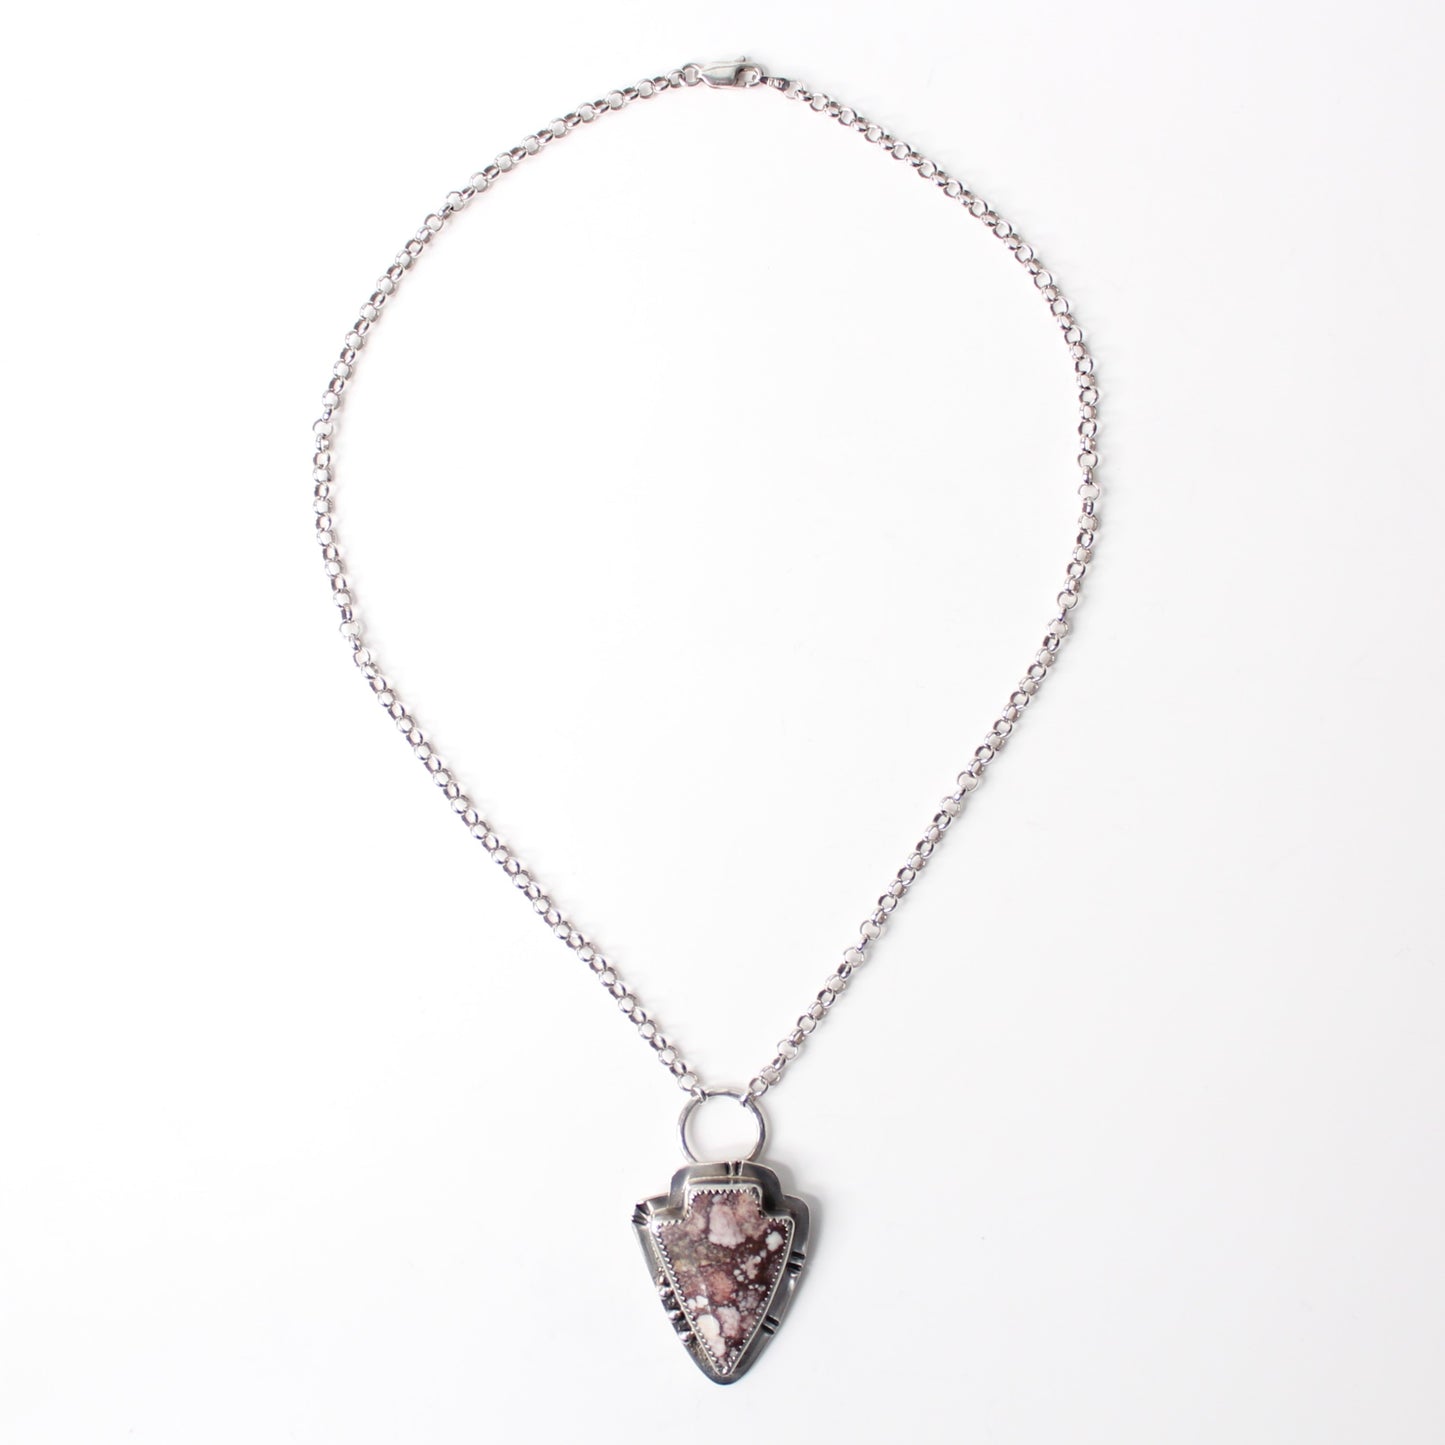 Wildhorse Magnesite Arrowhead Shaped Brown White Gemstone set in Sterling Silver Necklace with Silver Bead Accents